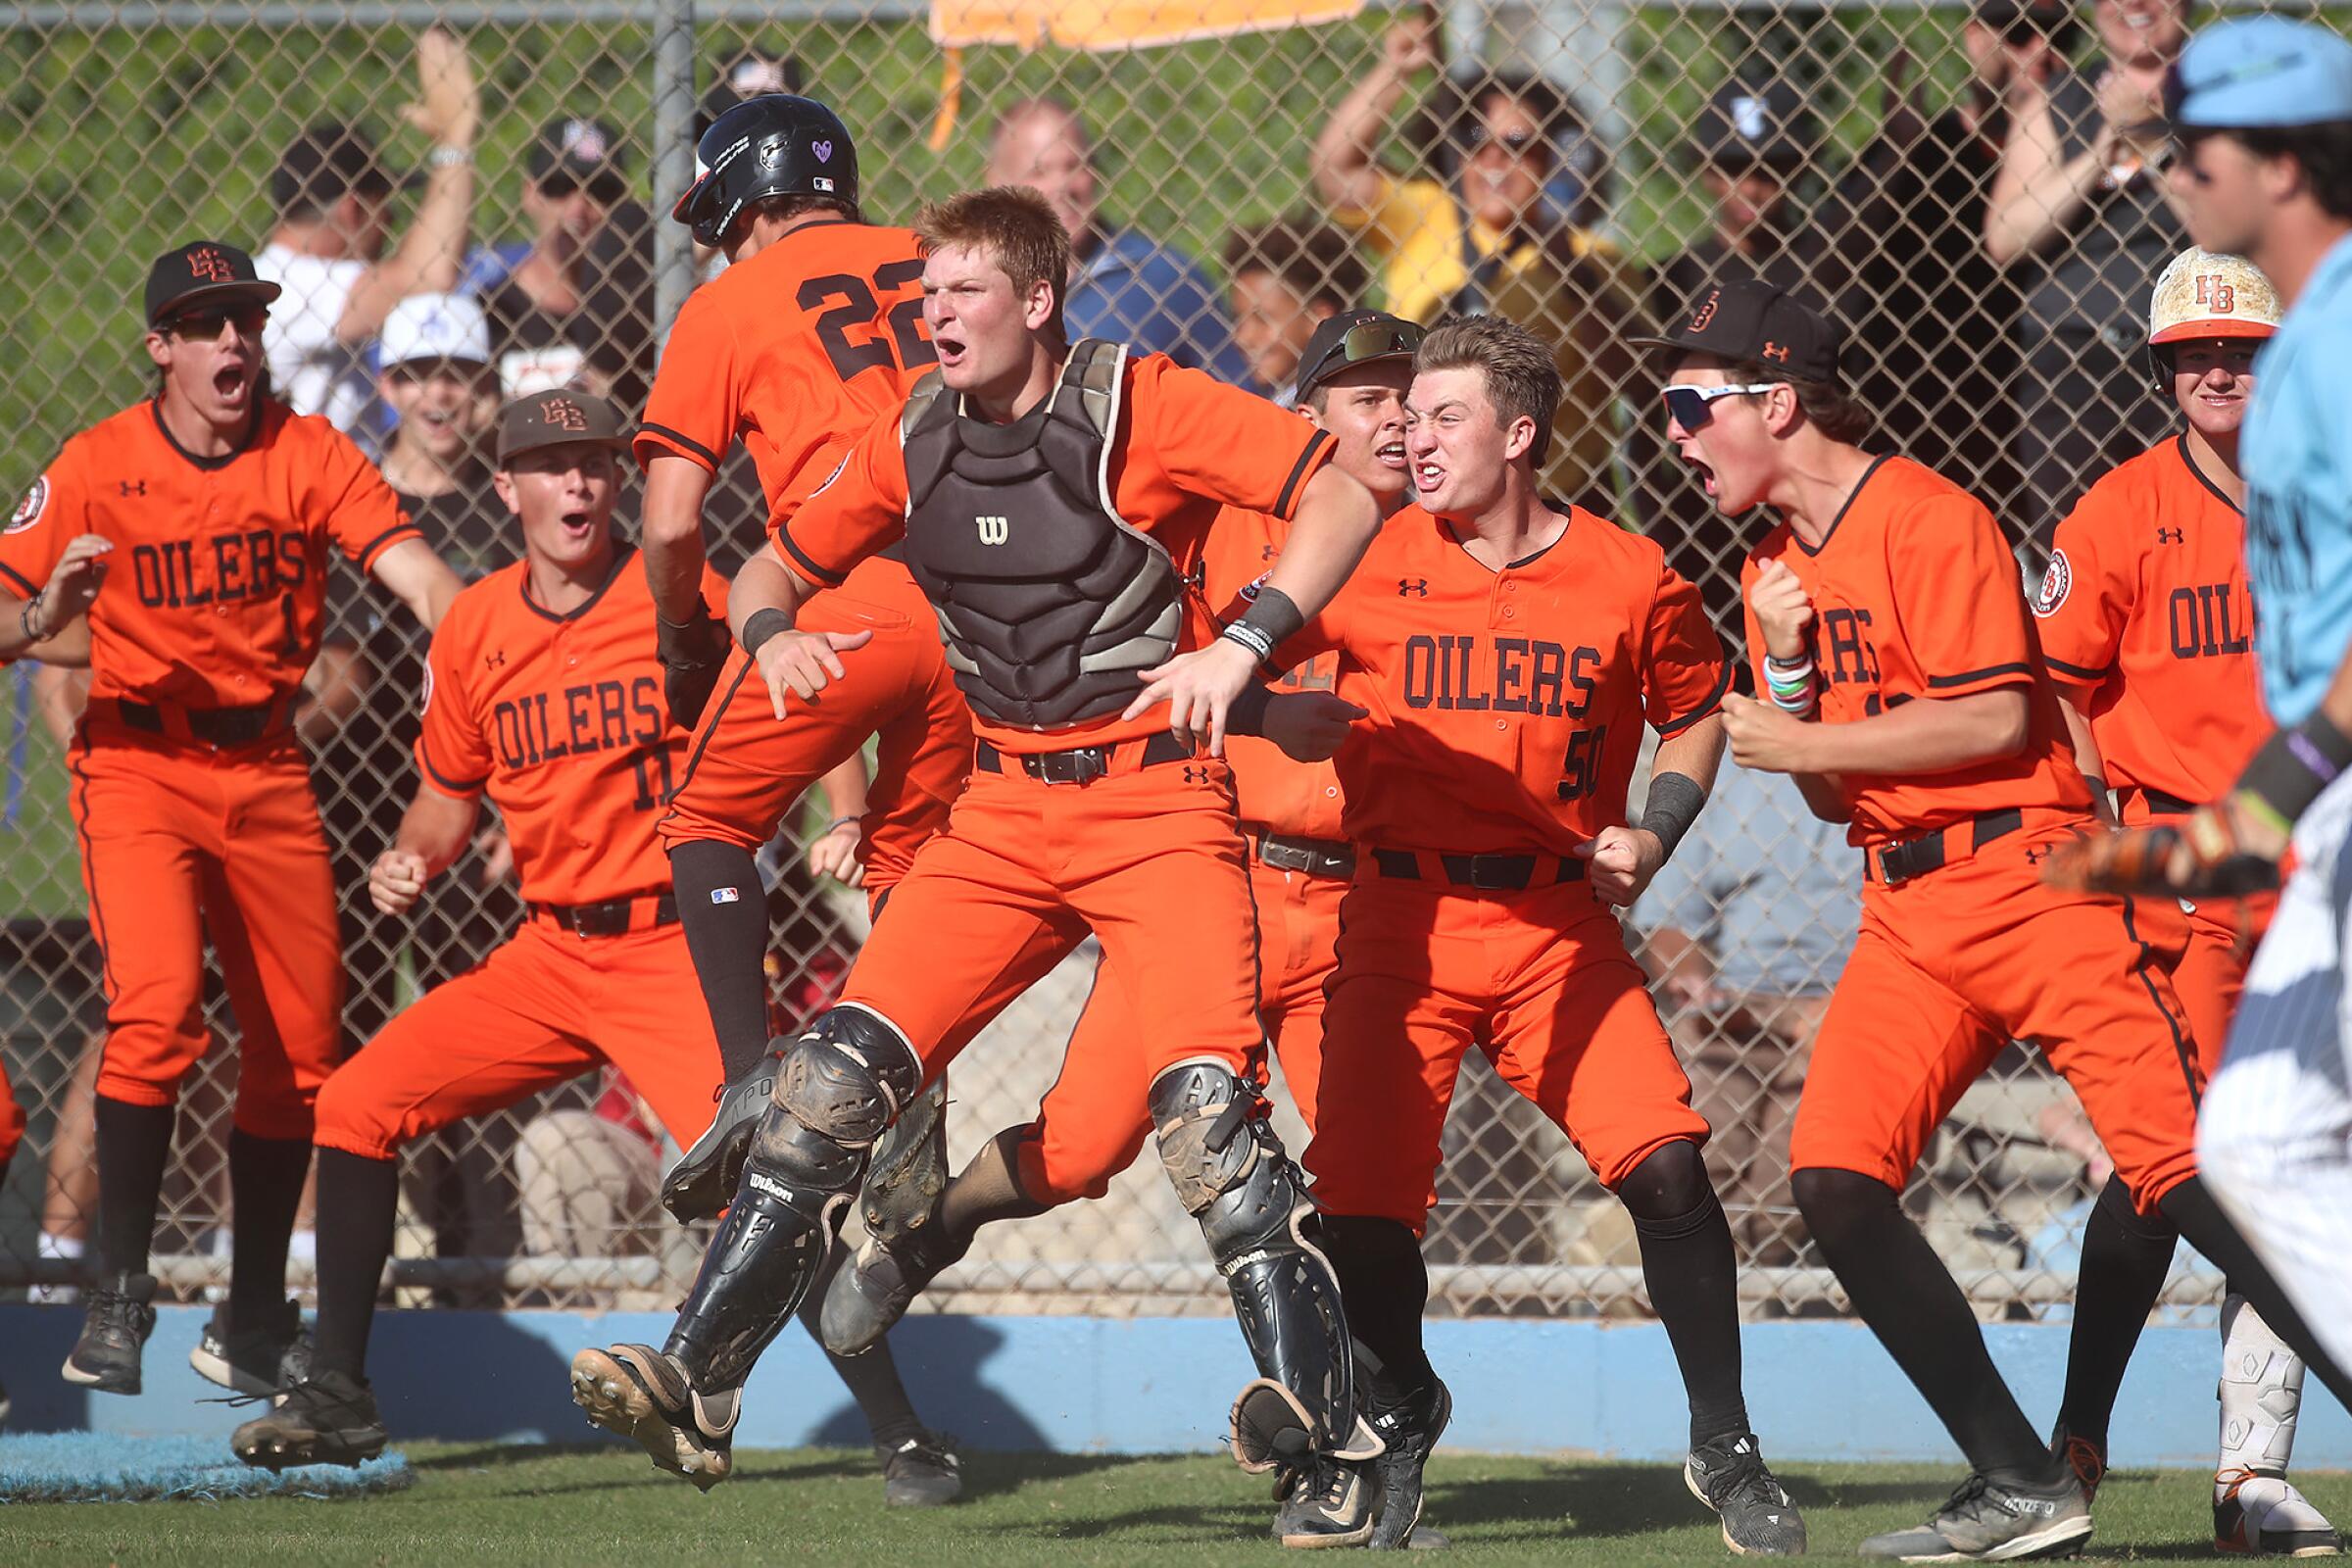 Trent Grendlinger (28) of Huntington Beach, with catchers vest, leads the collective cheer after teammate Nate Cox (22) crossed home plate for go ahead score during the second round of the Div-1 baseball playoffs against Villa Park on Tuesday.